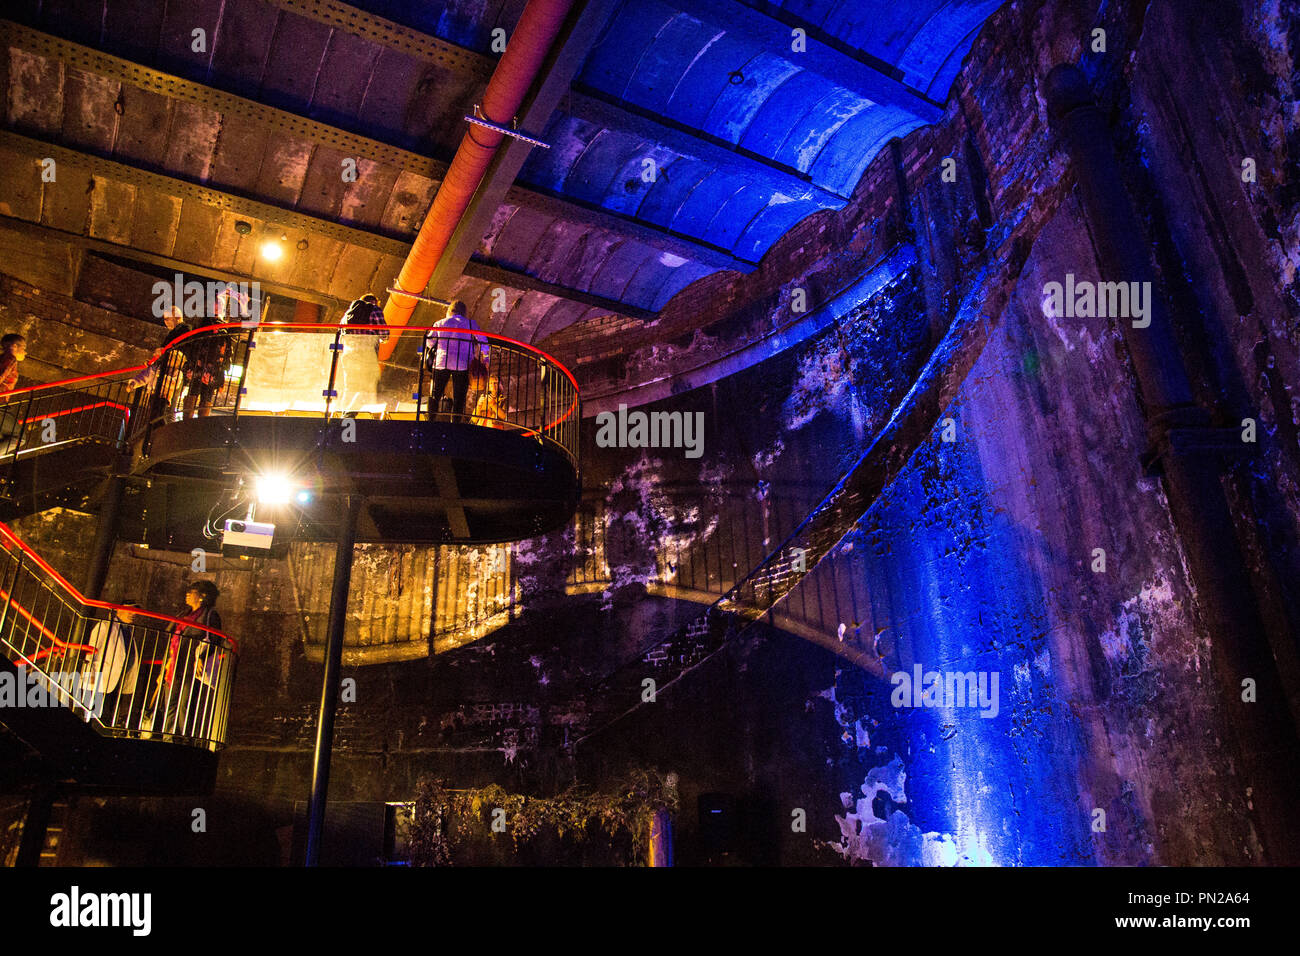 19th century shaft by Isambard Kingdom Brunel, part of the Thames Tunnel project, Underground venue at the Brunel Museum, London, UK Stock Photo